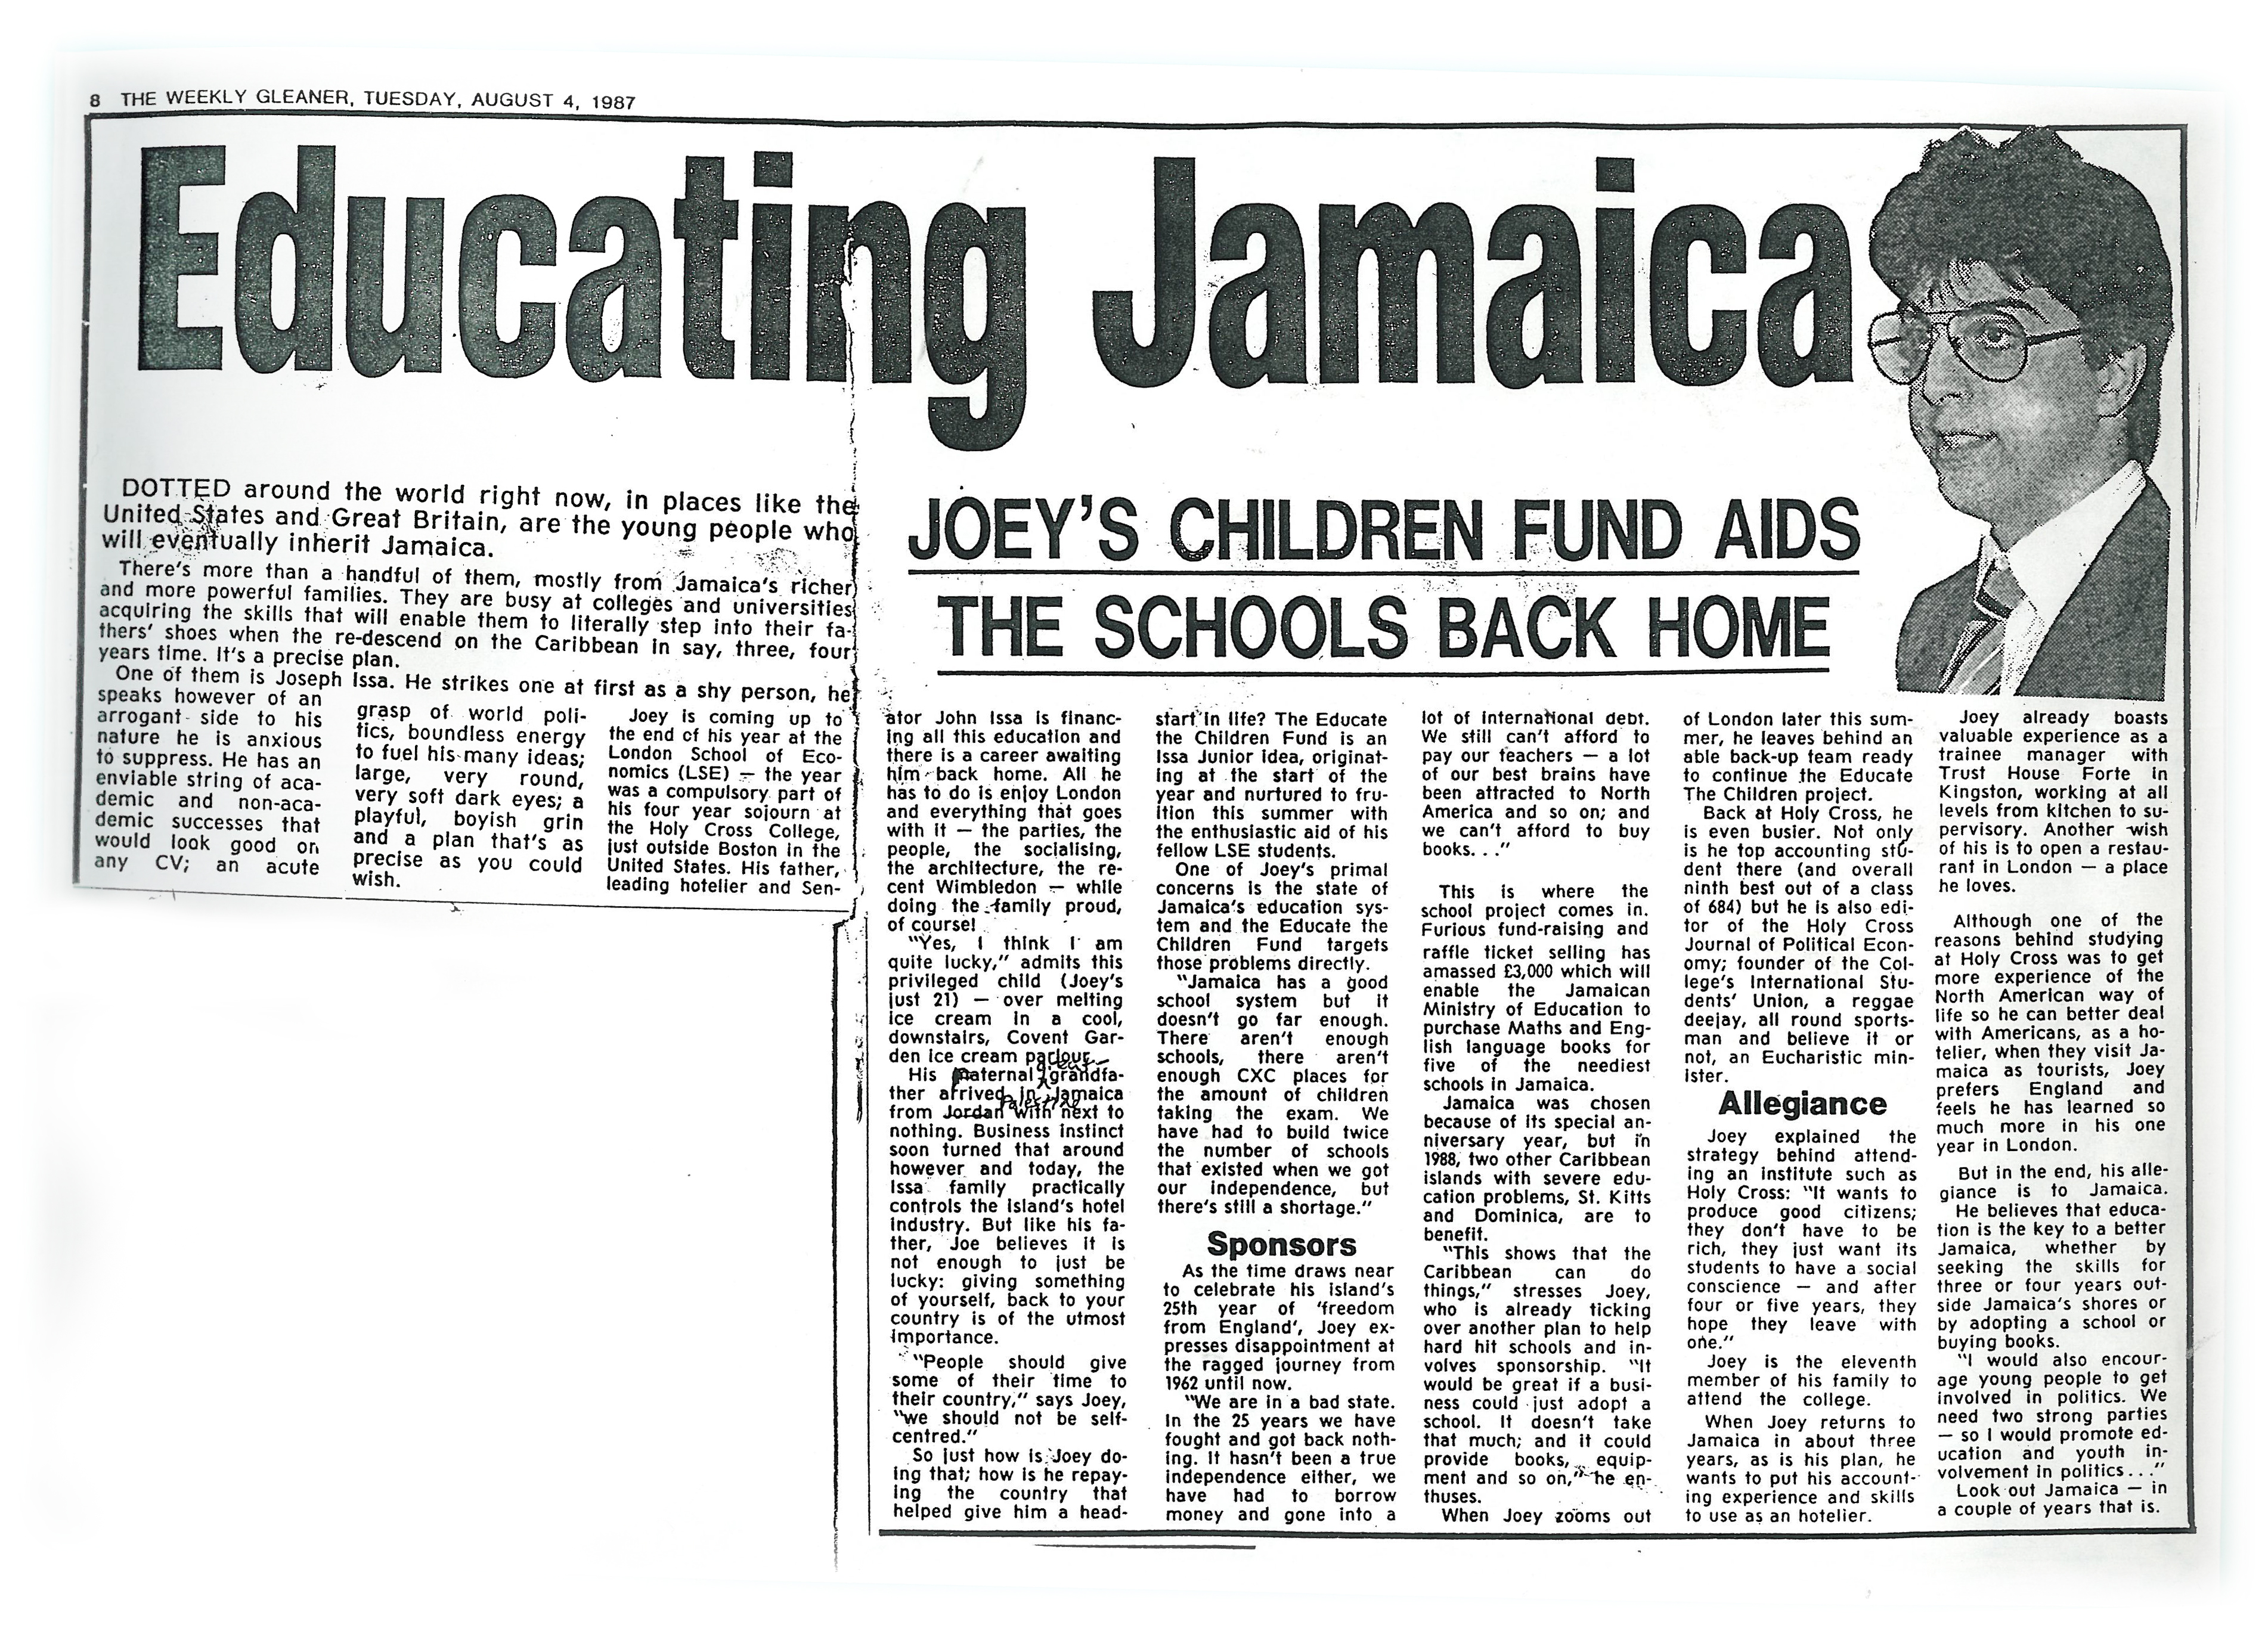 Educating Jamaica: Joey's children fund aids the schools back home